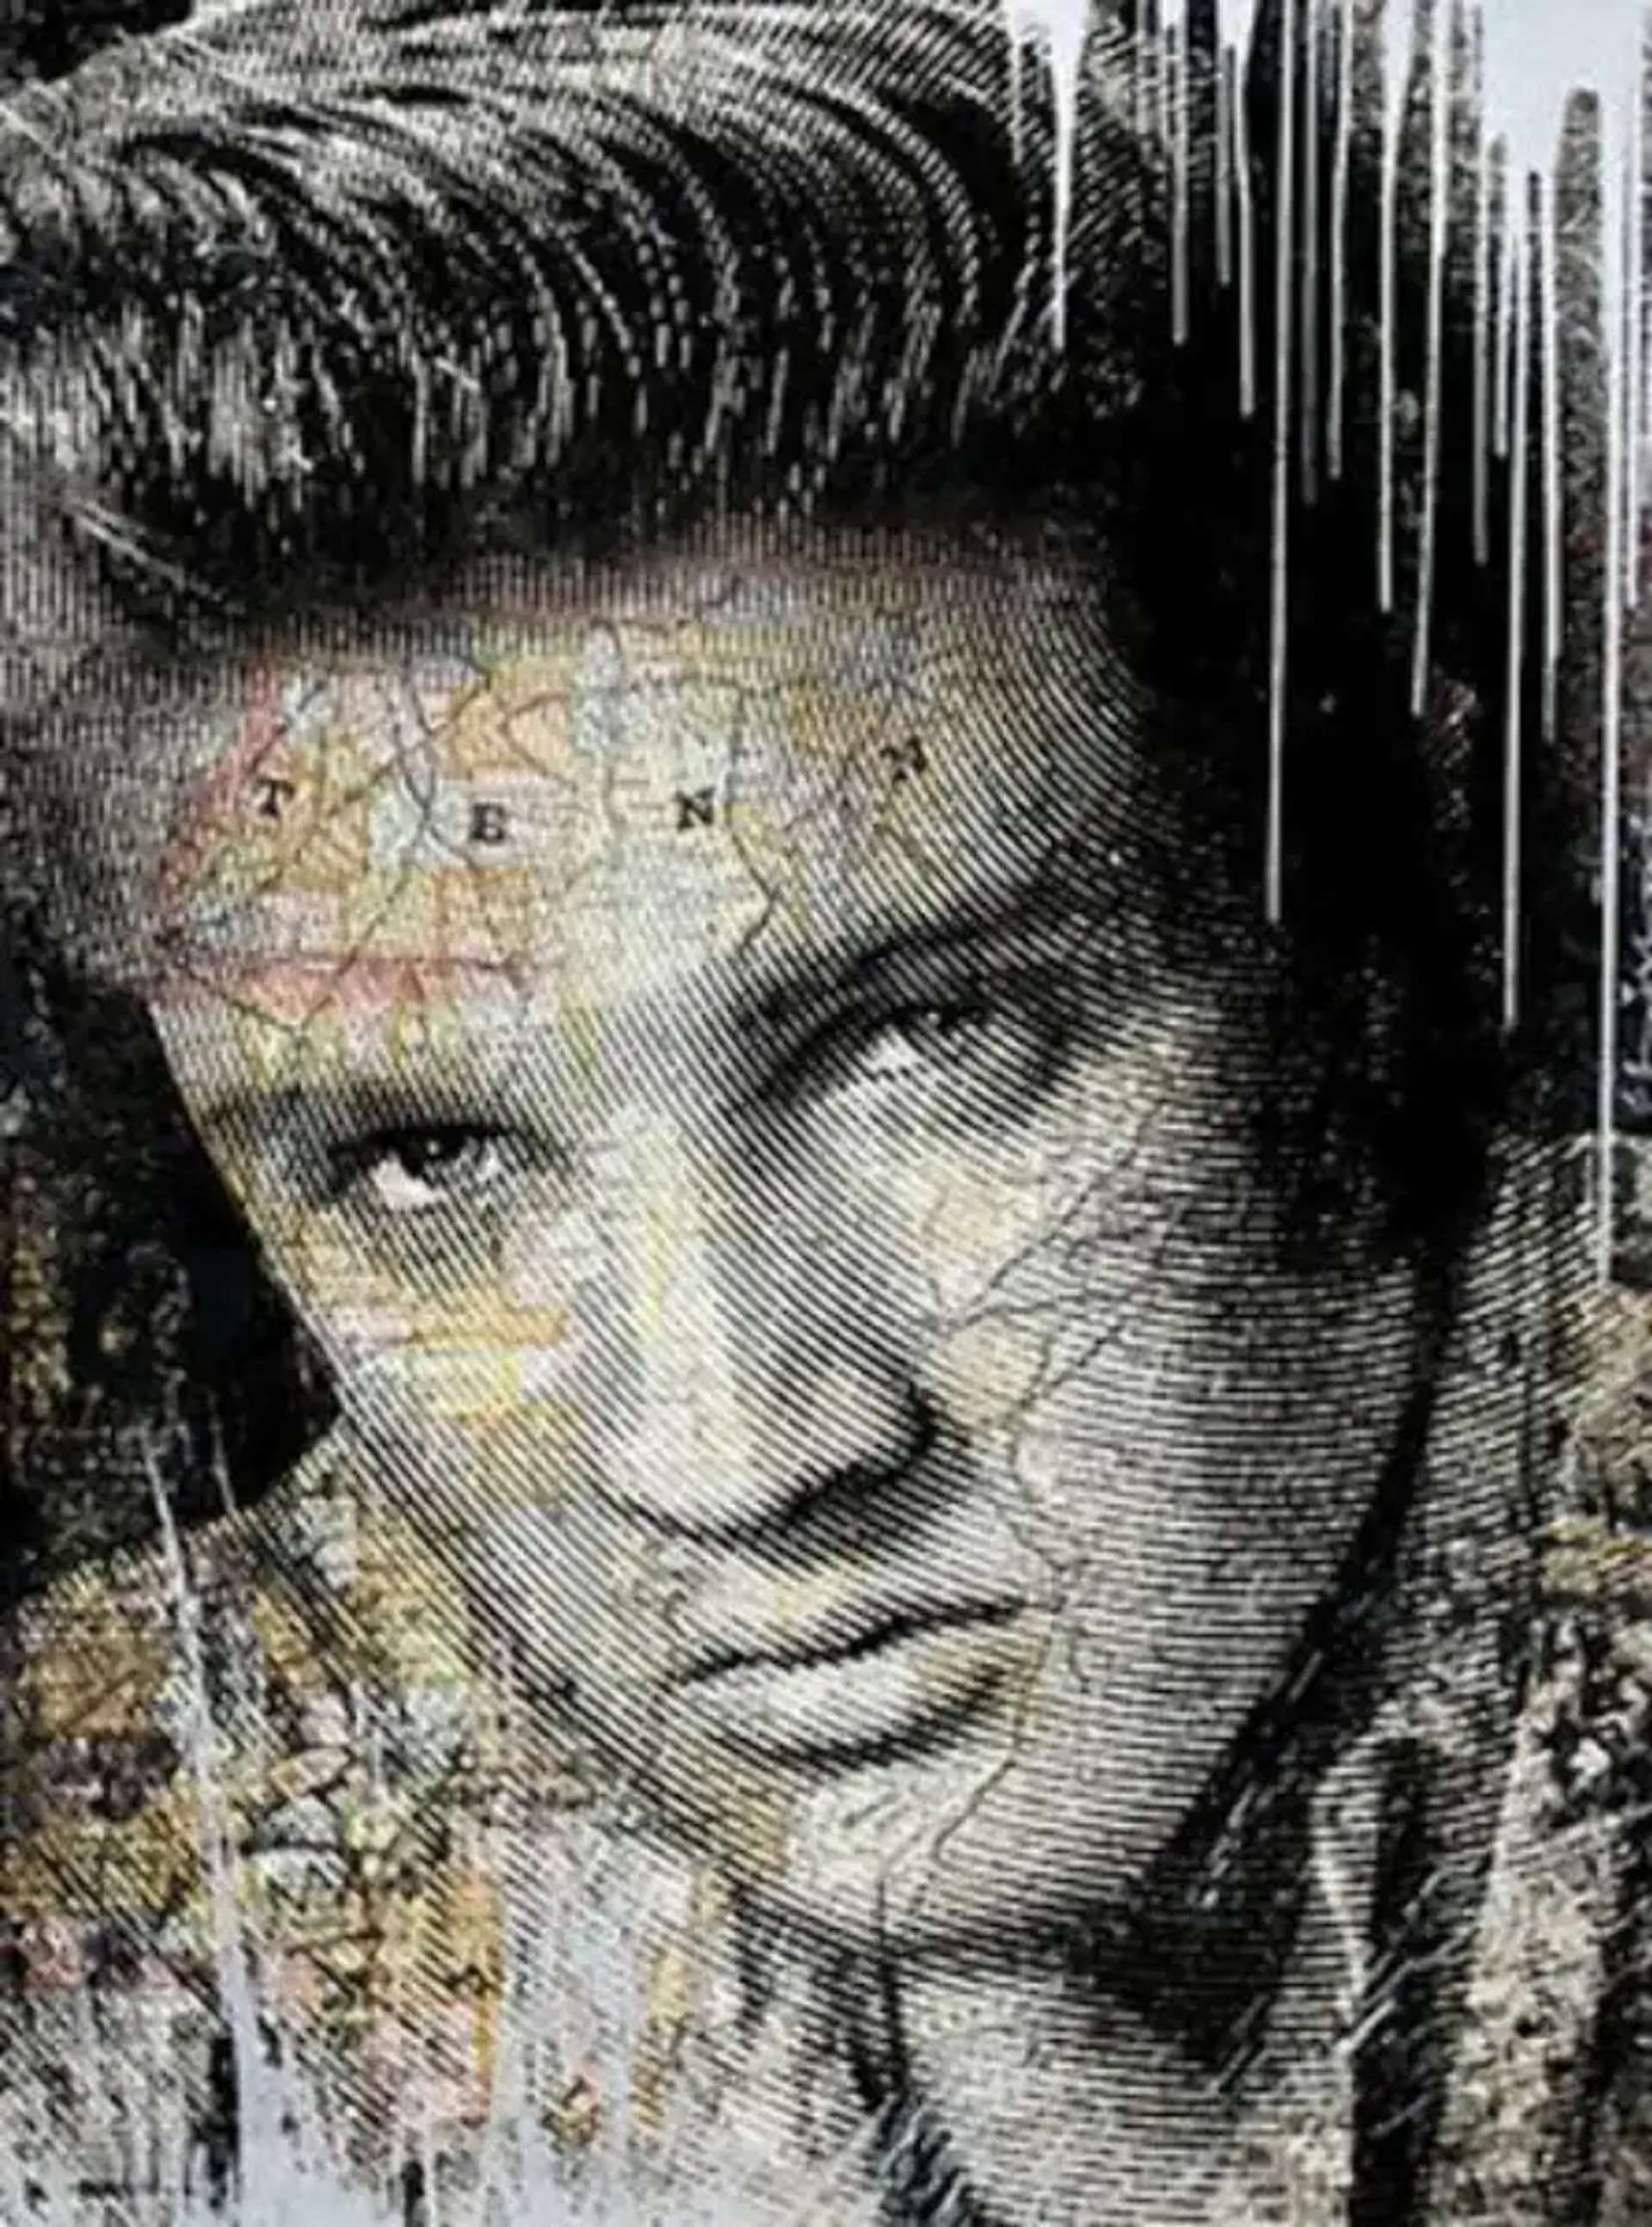 A coloured screenprint portrait of rock legend Elvis Presley, featuring a thumb imprint as the main image with faint markings resembling a colourful map over his forehead. Grey paint drips from the top right-hand corner of the artwork and splatters upwards from the bottom left-hand corner."